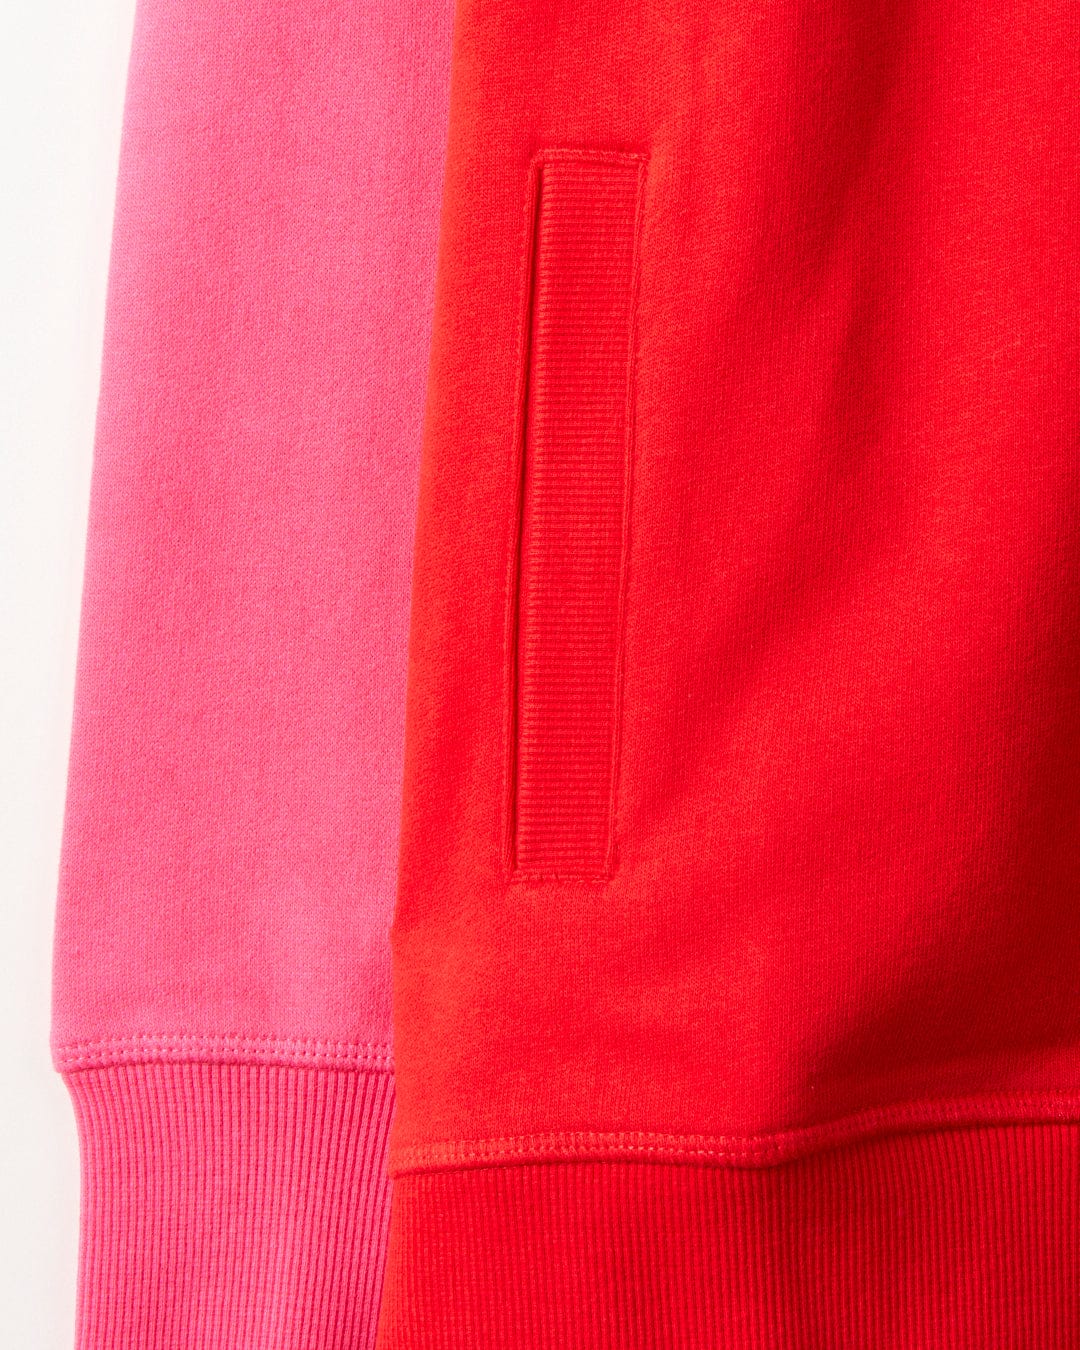 Close-up of two sweatshirts side by side, one in pink and the other in red, showcasing their hem and side pocket detail. These stylish pieces feature fine cotton fabric, illustrating Saltrock branding with exquisite craftsmanship. The red one is the Tropic - Womens Zip Hoodie from Saltrock.